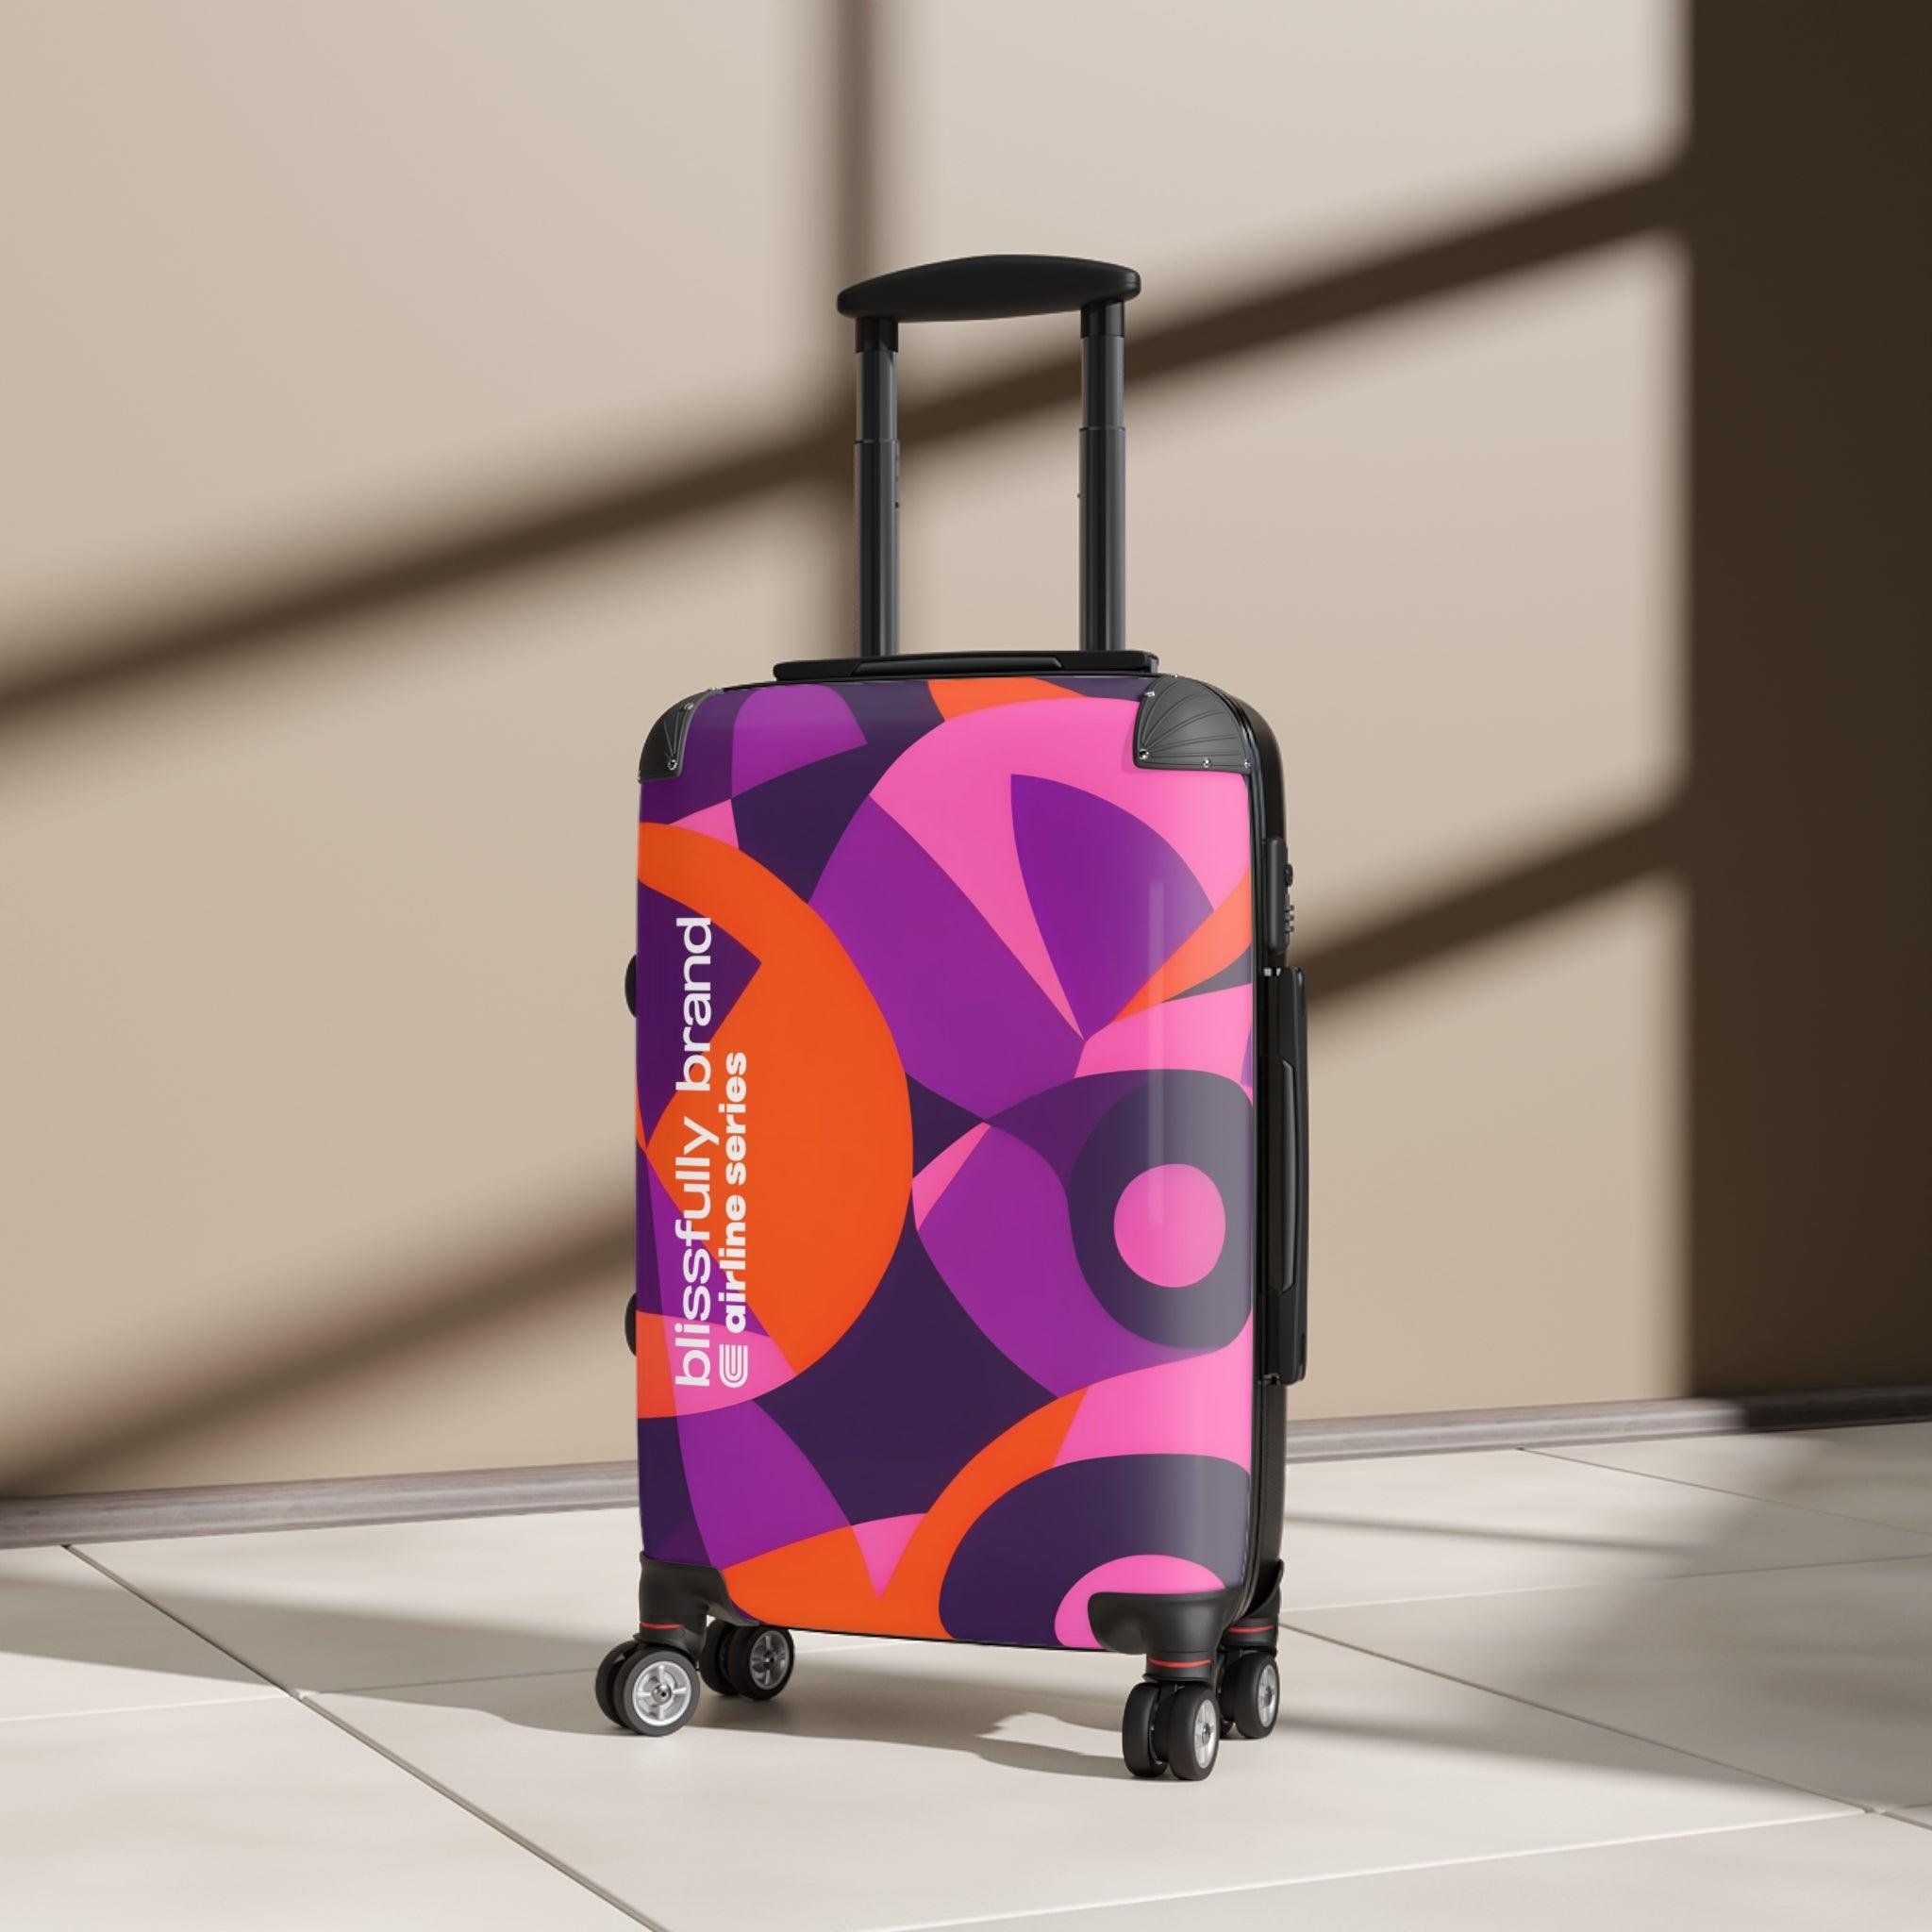 Flight 239 Tokyo Airline Series Abstract  Print Geometric Retro Swirls Funky Multicolor Check in Carry On Roller 360 Hard Shell Unique Retro Vibrant Bold Eclectic - Violet Orange Avant Garde